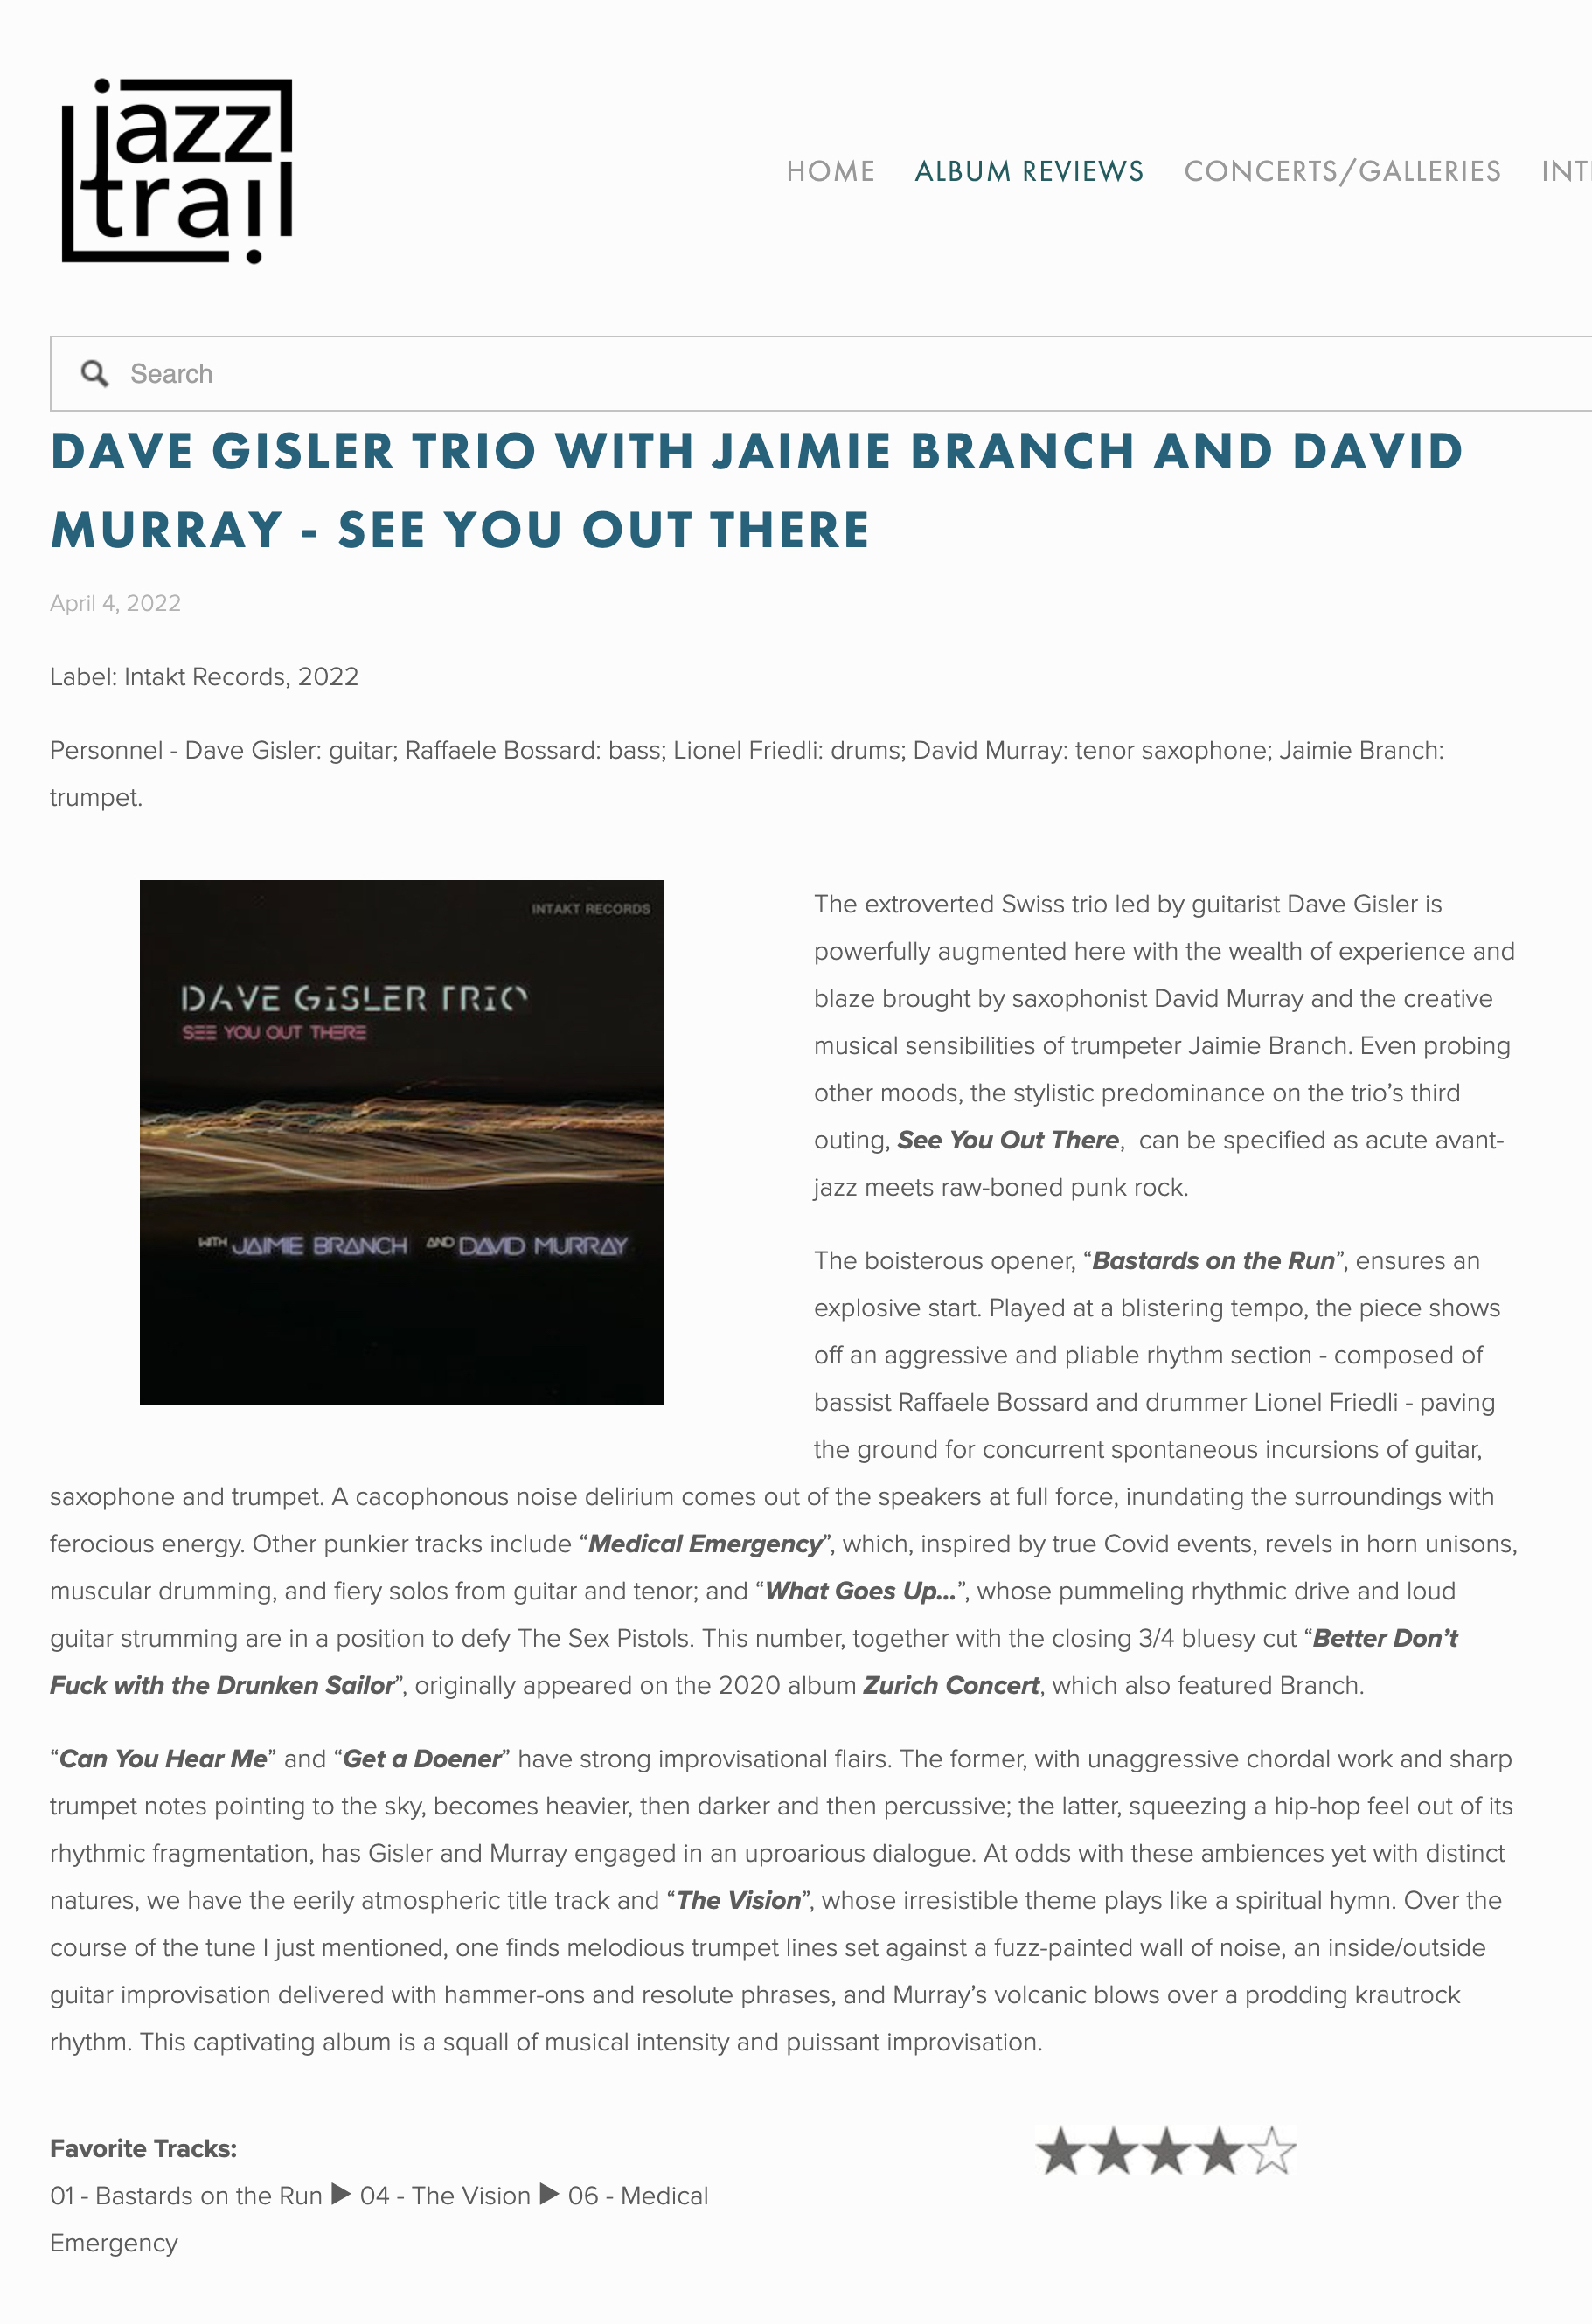 The extroverted Swiss trio led by guitarist Dave Gisler is powerfully augmented here with the wealth of experience and blaze brought by saxophonist David Murray and the creative musical sensibilities of trumpeter Jaimie Branch. Even probing other moods, the stylistic predominance on the trio’s third outing, See You Out There,  can be specified as acute avant-jazz meets raw-boned punk rock.